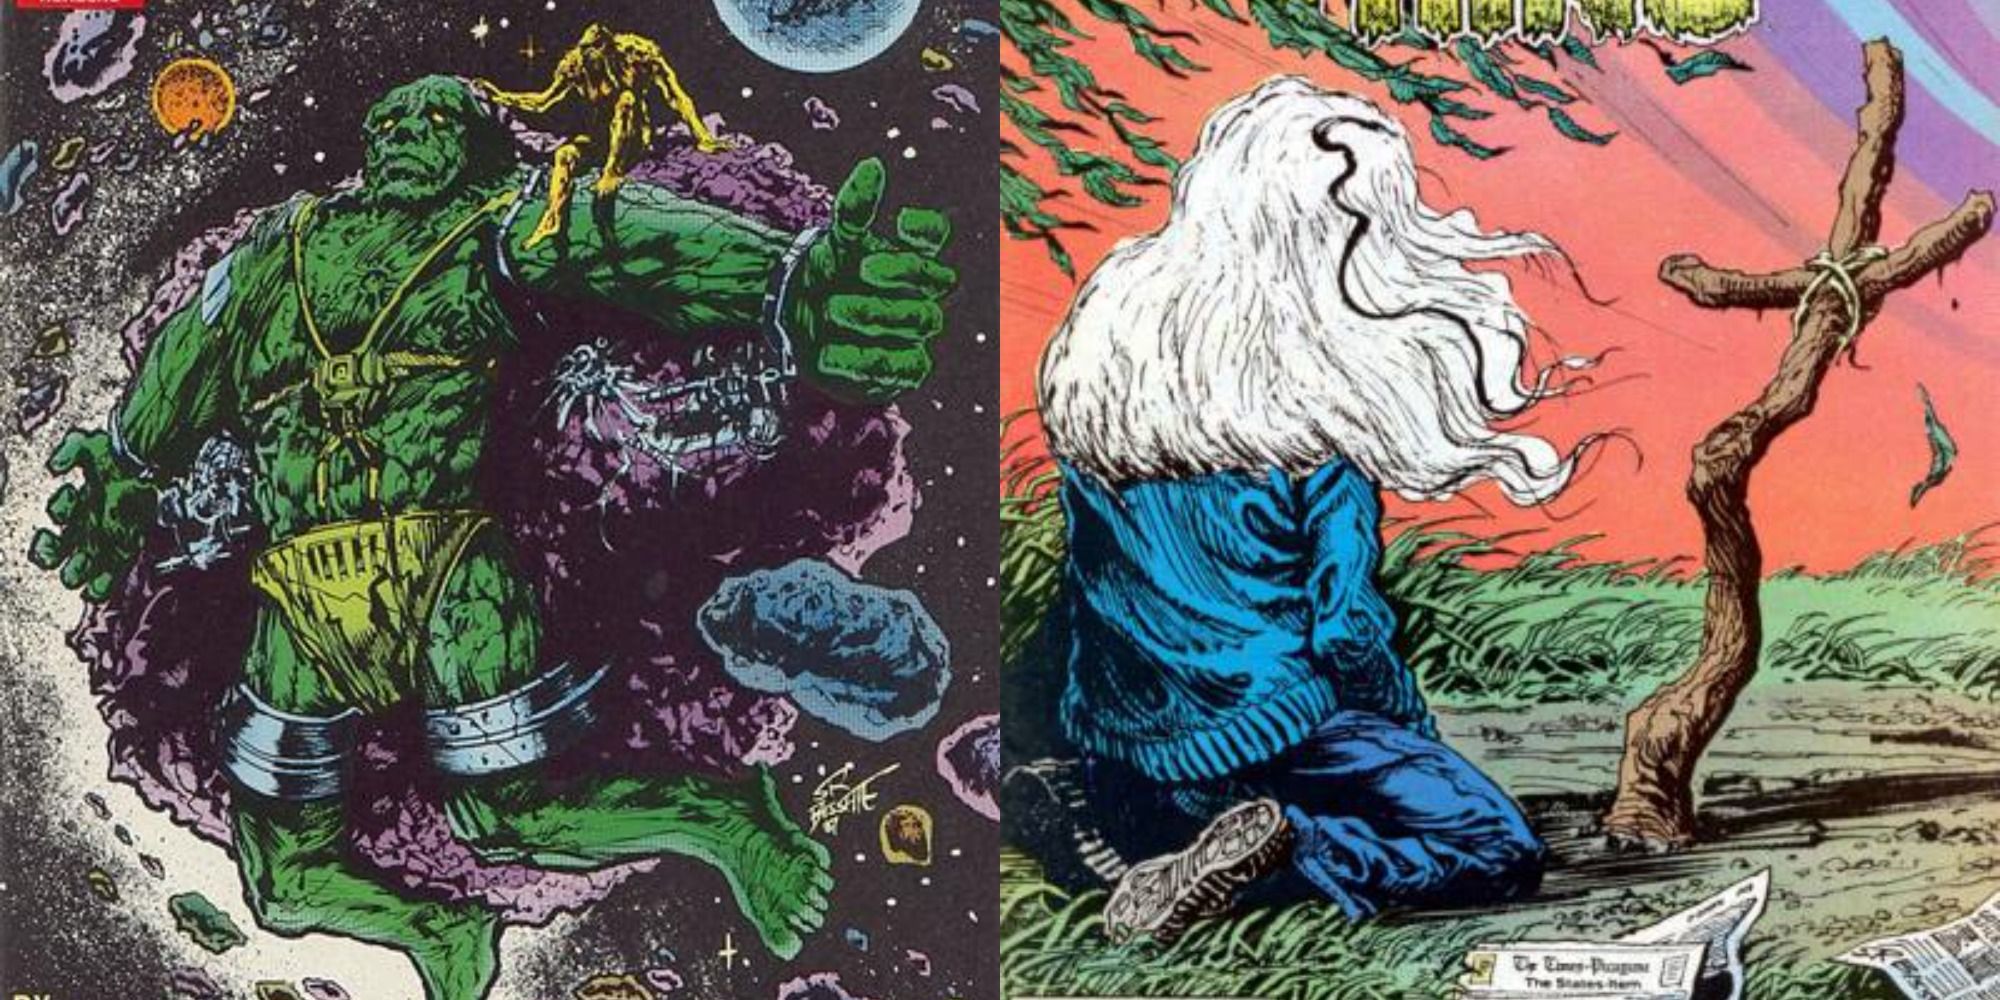 Alan Moores Swamp Thing 7 Issues That Solidified Its Place In Comics History - Wechoiceblogger